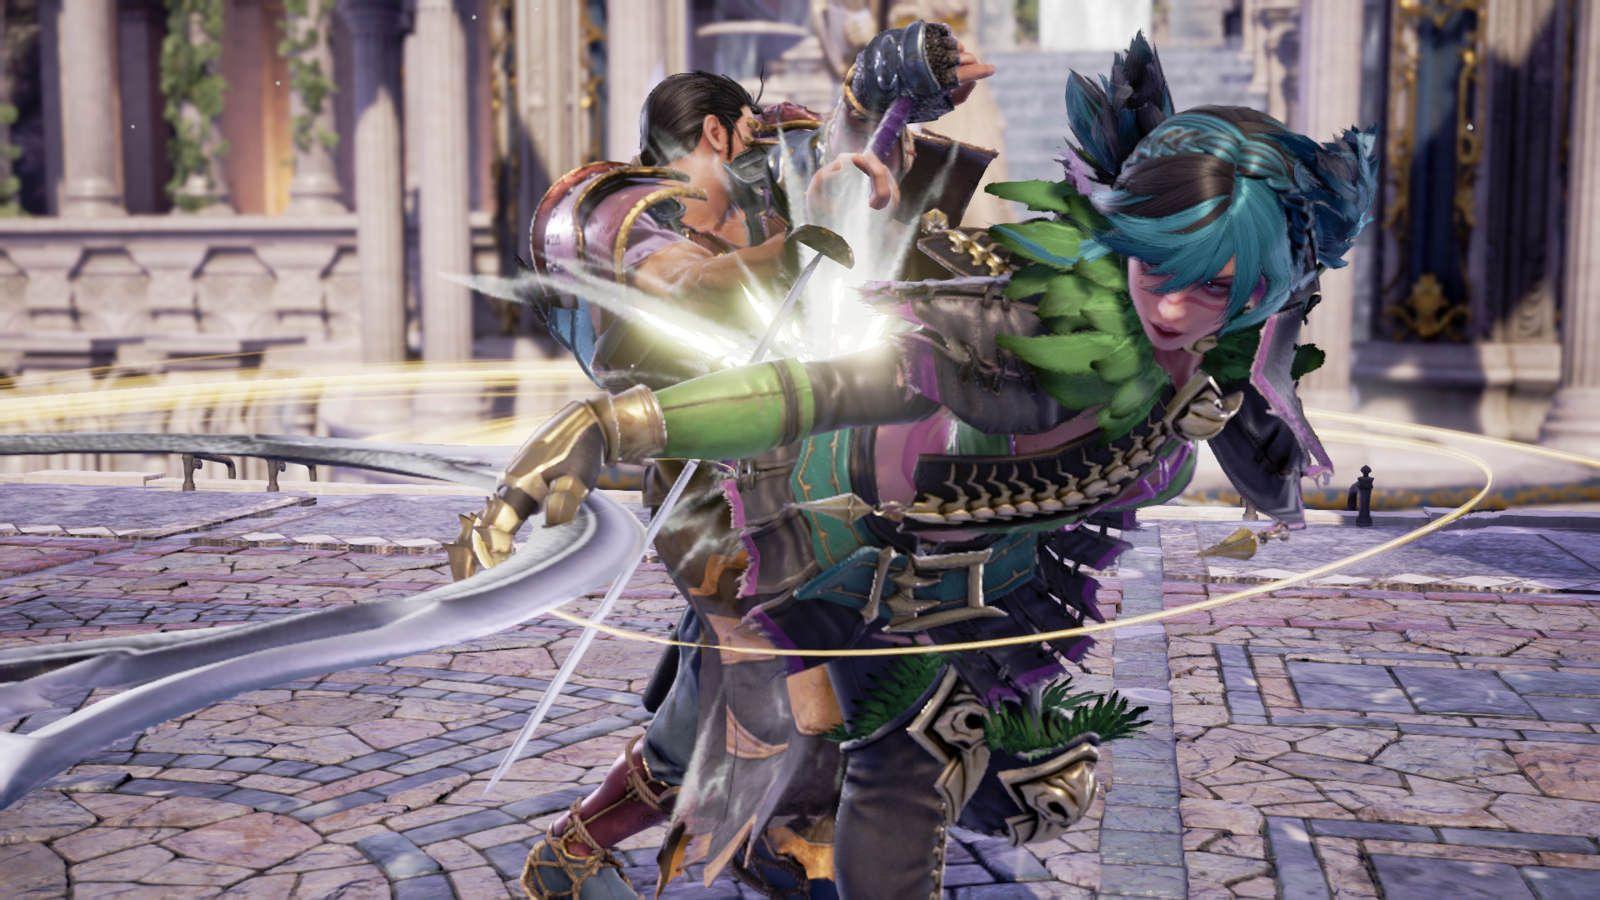 Tira Returns to the Stage of History in SoulCalibur VI